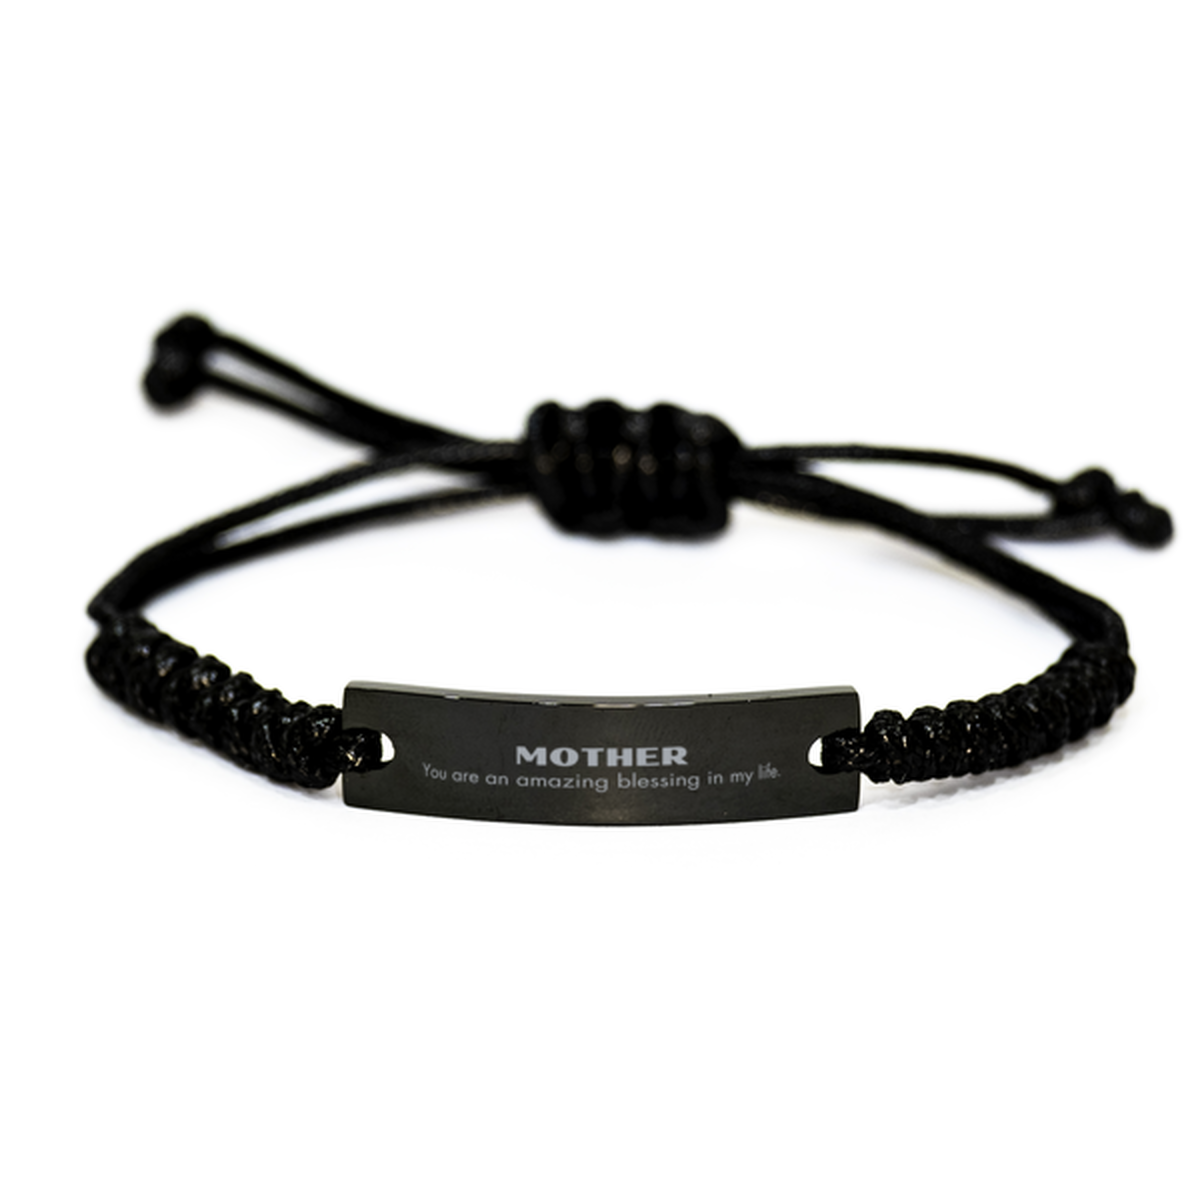 Mother Black Rope Bracelet, You are an amazing blessing in my life, Thank You Gifts For Mother, Inspirational Birthday Christmas Unique Gifts For Mother